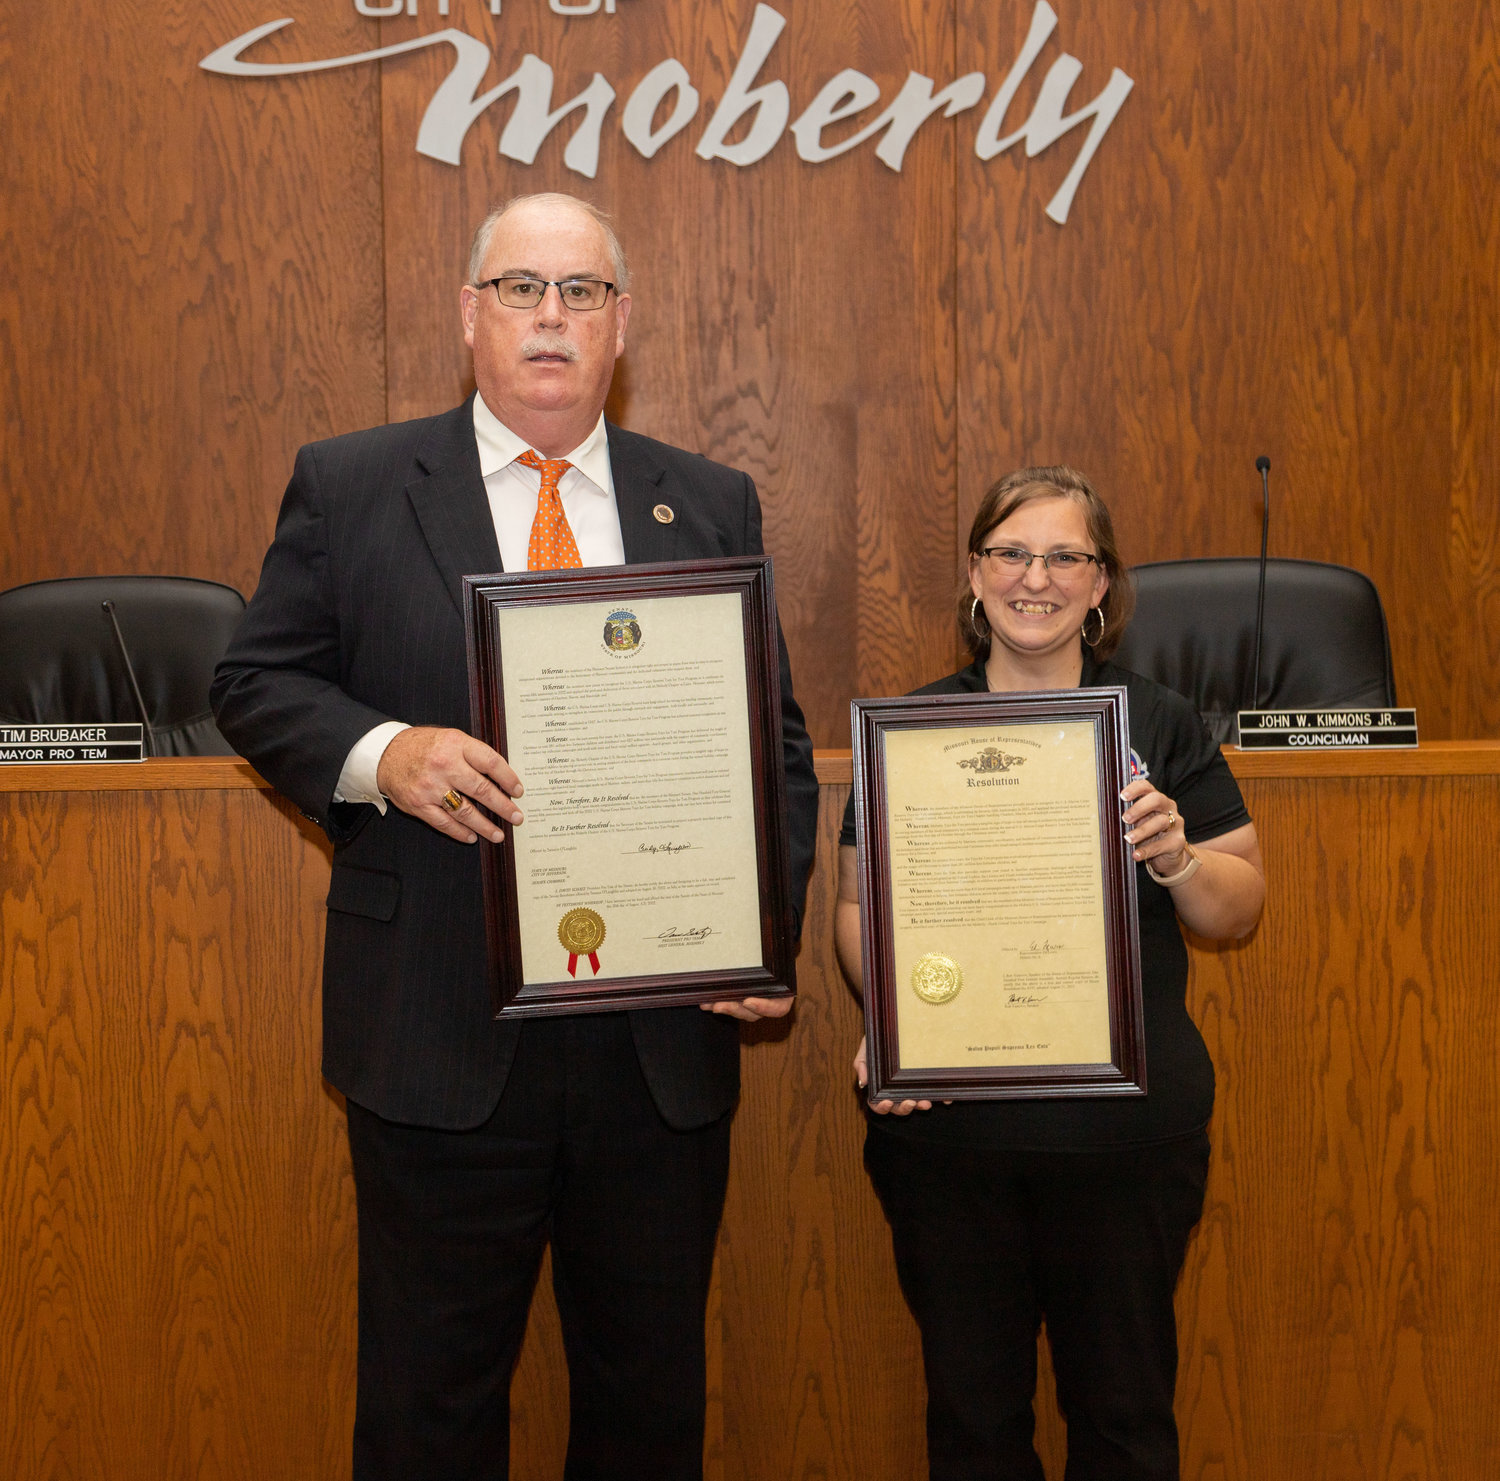 Moberly Mayor Jerry Jeffrey and Toys for Tots Coordinator Carma Palmer display resolutions passed by the Missouri House and Senate recognizing Marine Corps Reserve Toys for Tots Foundation for 75 years of service.